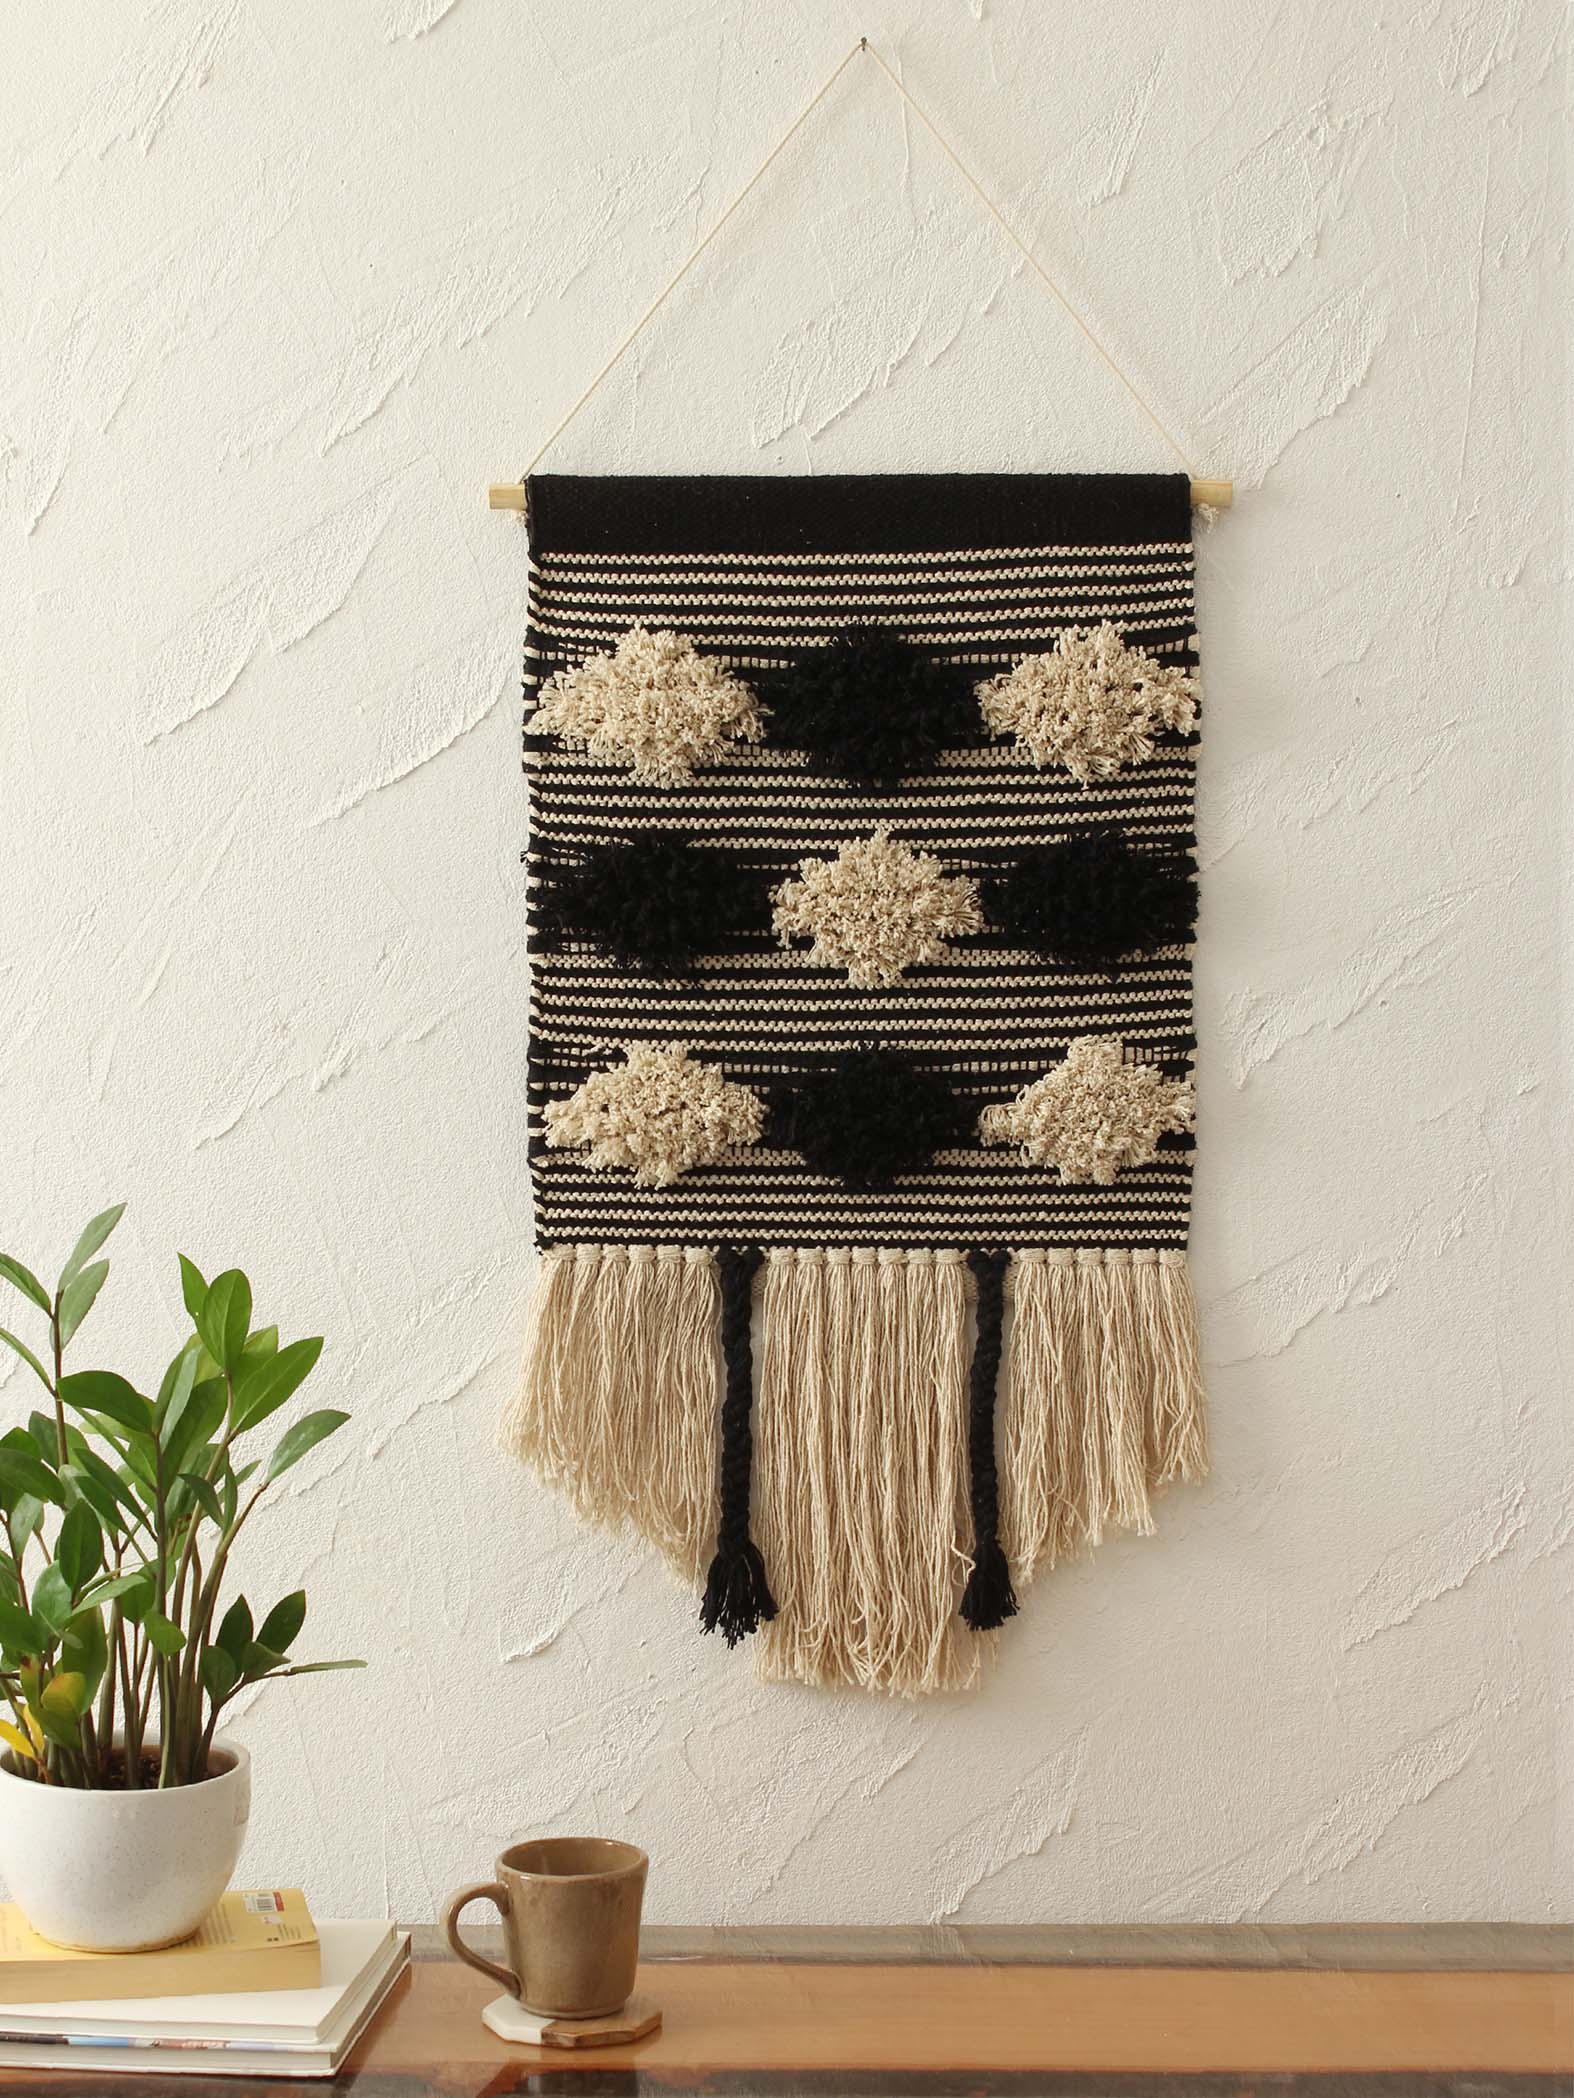 Chaukadi Wall Hanging By House This